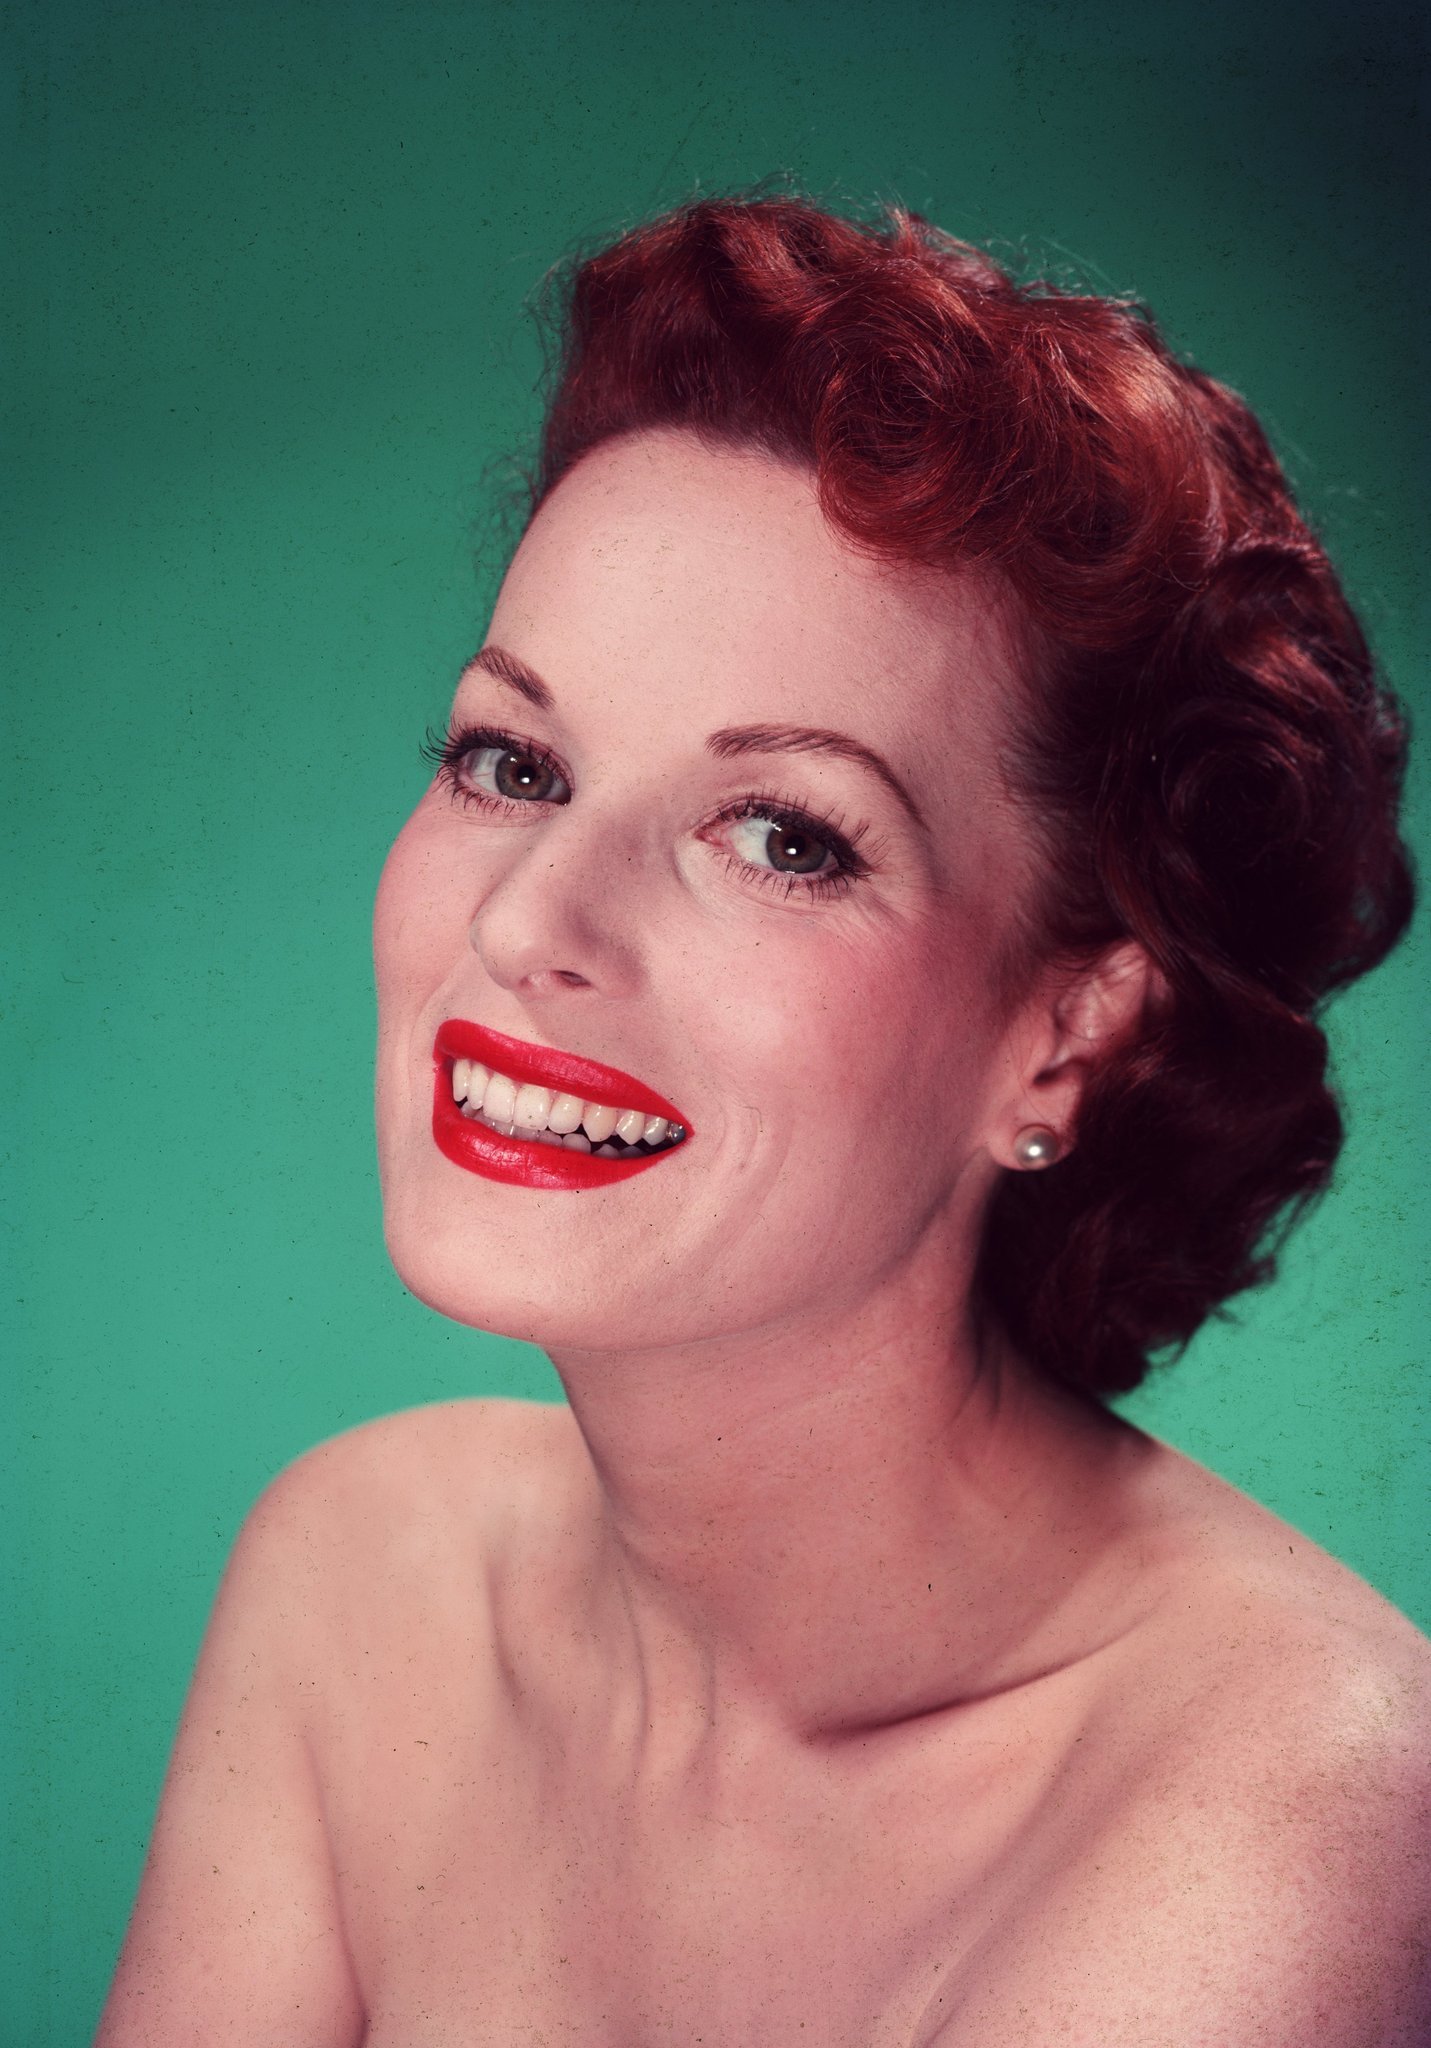 Maureen O Hara The Only Leading Lady Big Enough And Tough Enough For 